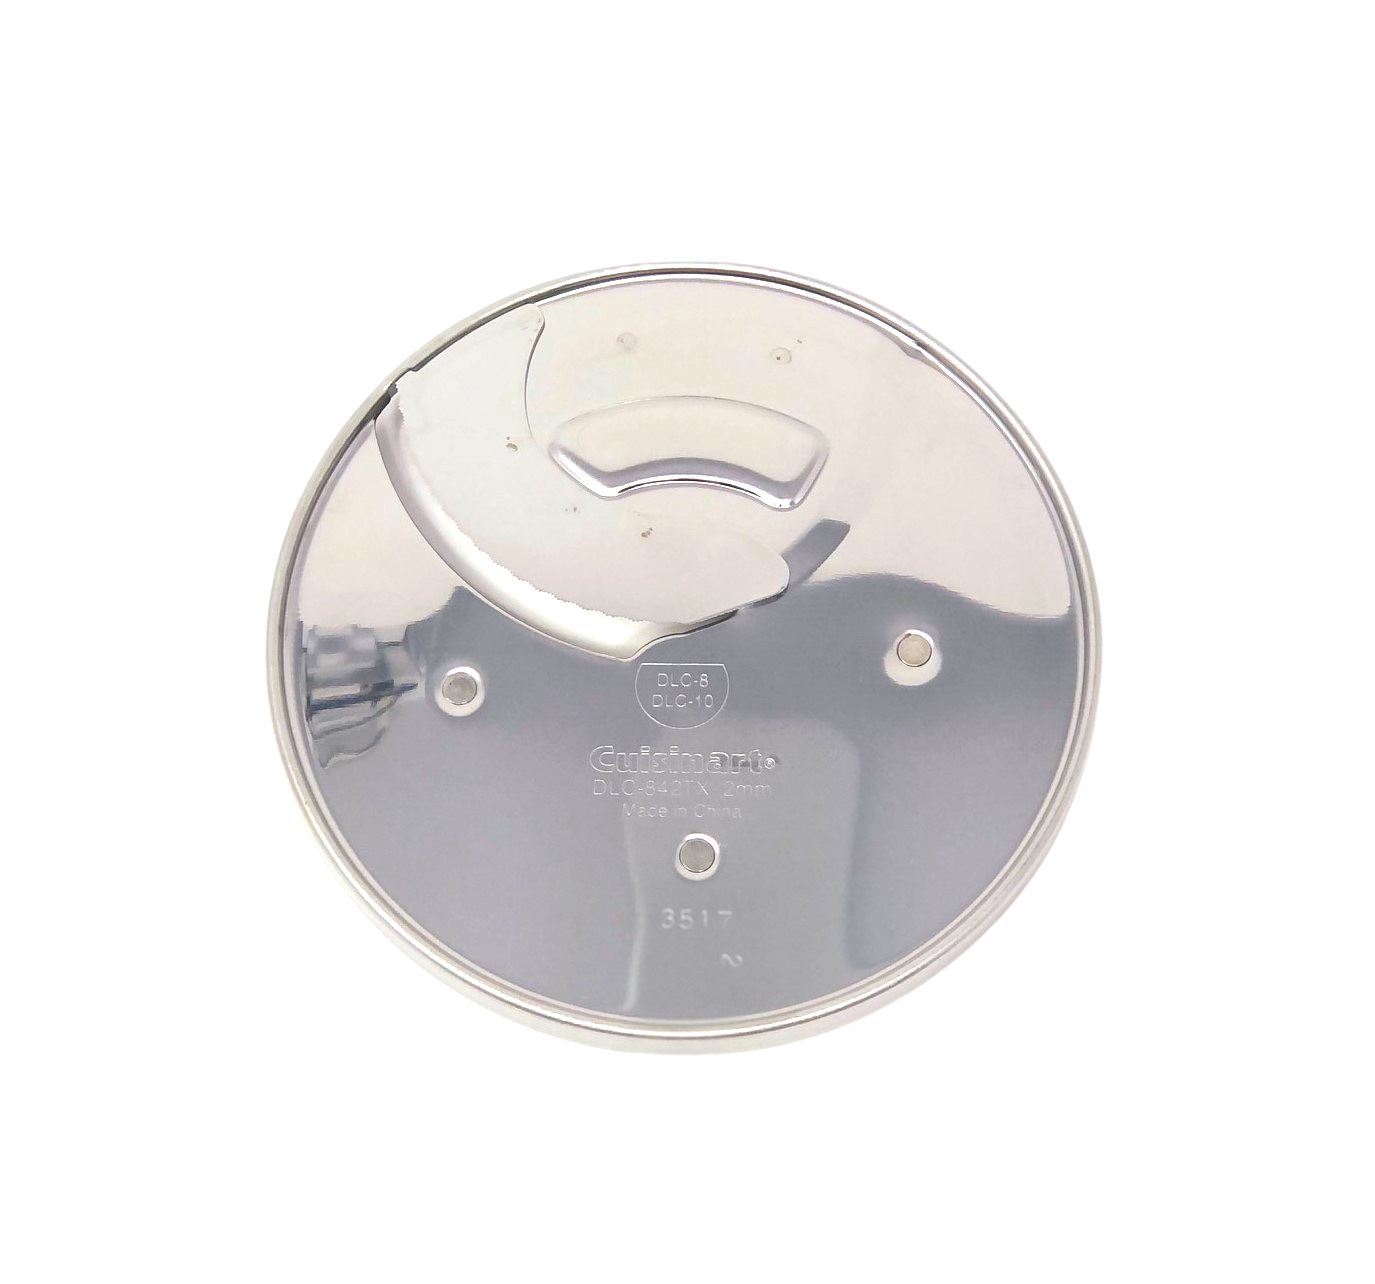 Cuisinart DLC-8 and 10 Thin Slicer Disc 2mm Part